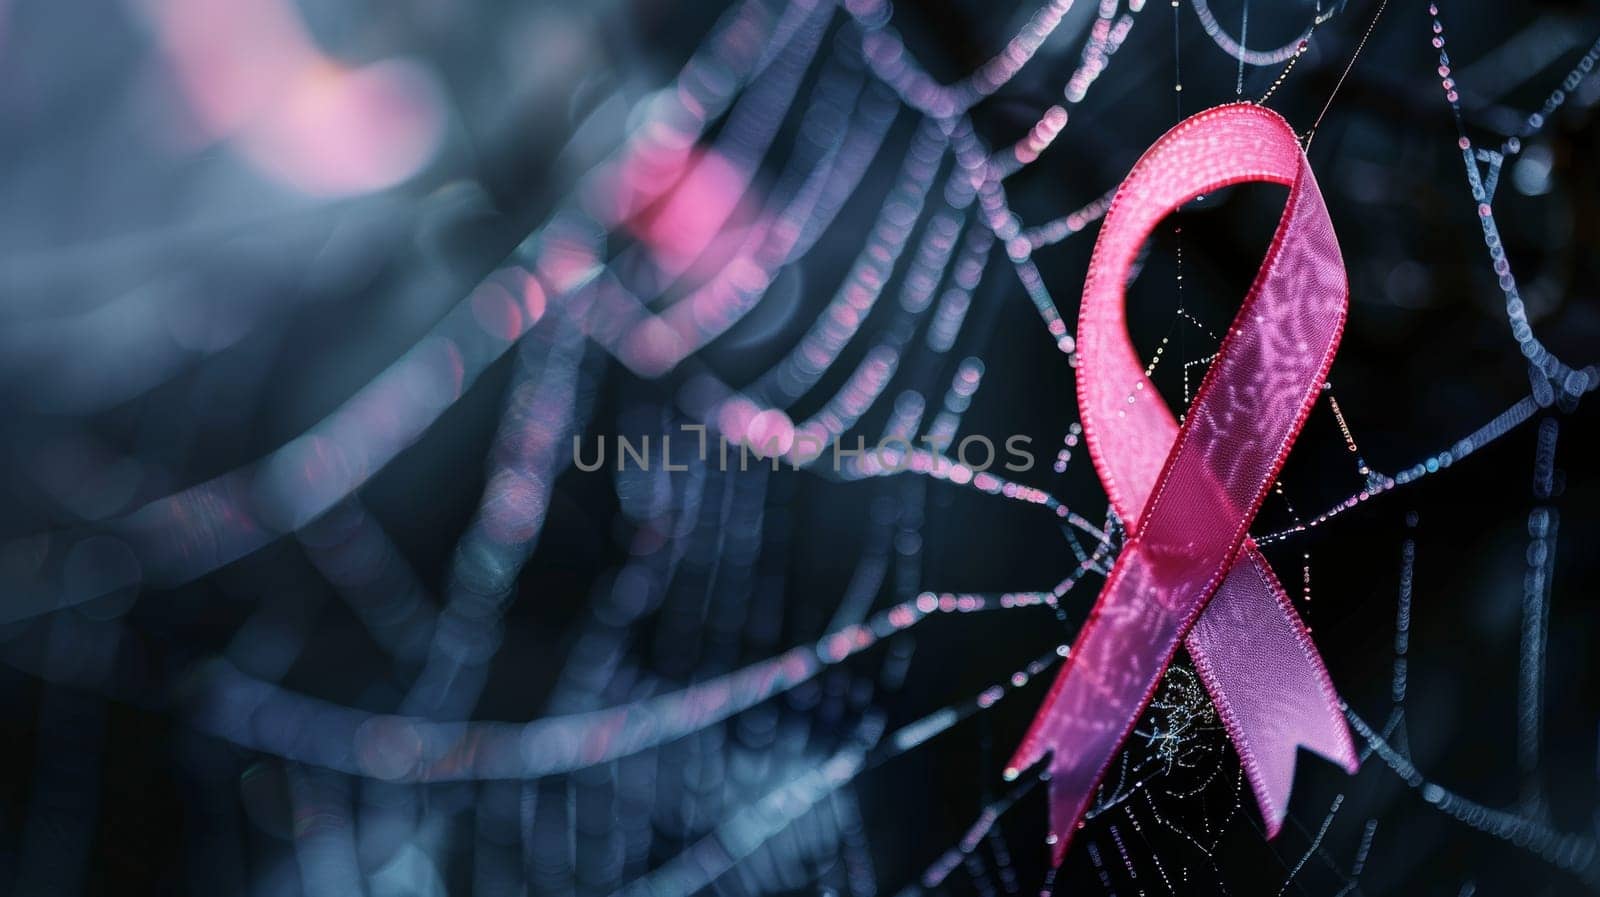 Pink ribbon awareness symbol resting on spider web with dew drops. Symbolic of Breast Cancer Awareness Month in October. by ailike